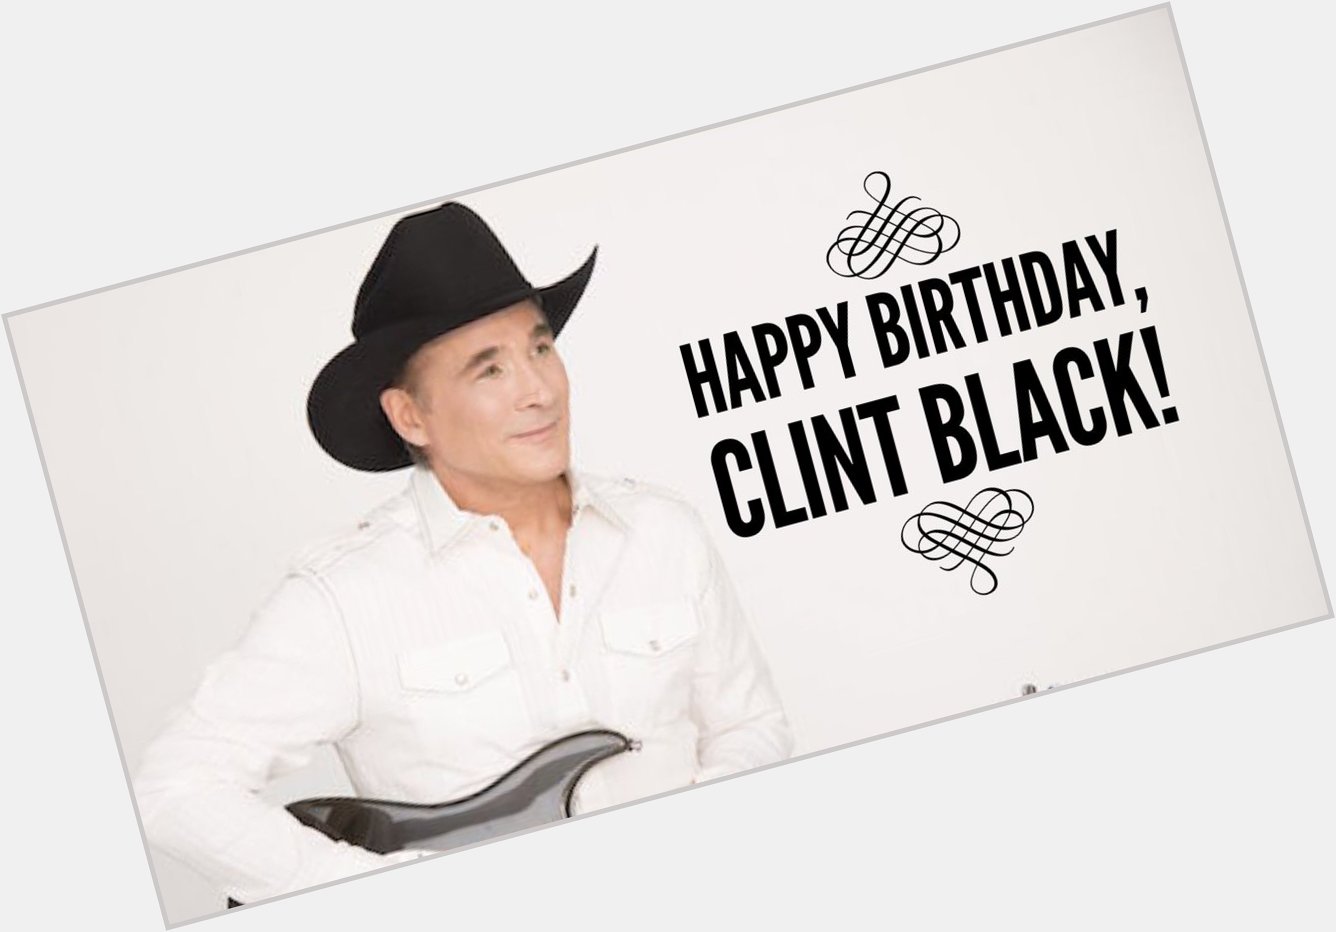 Happy 56th Birthday to Clint Black! What s your favorite of his hit country songs?  